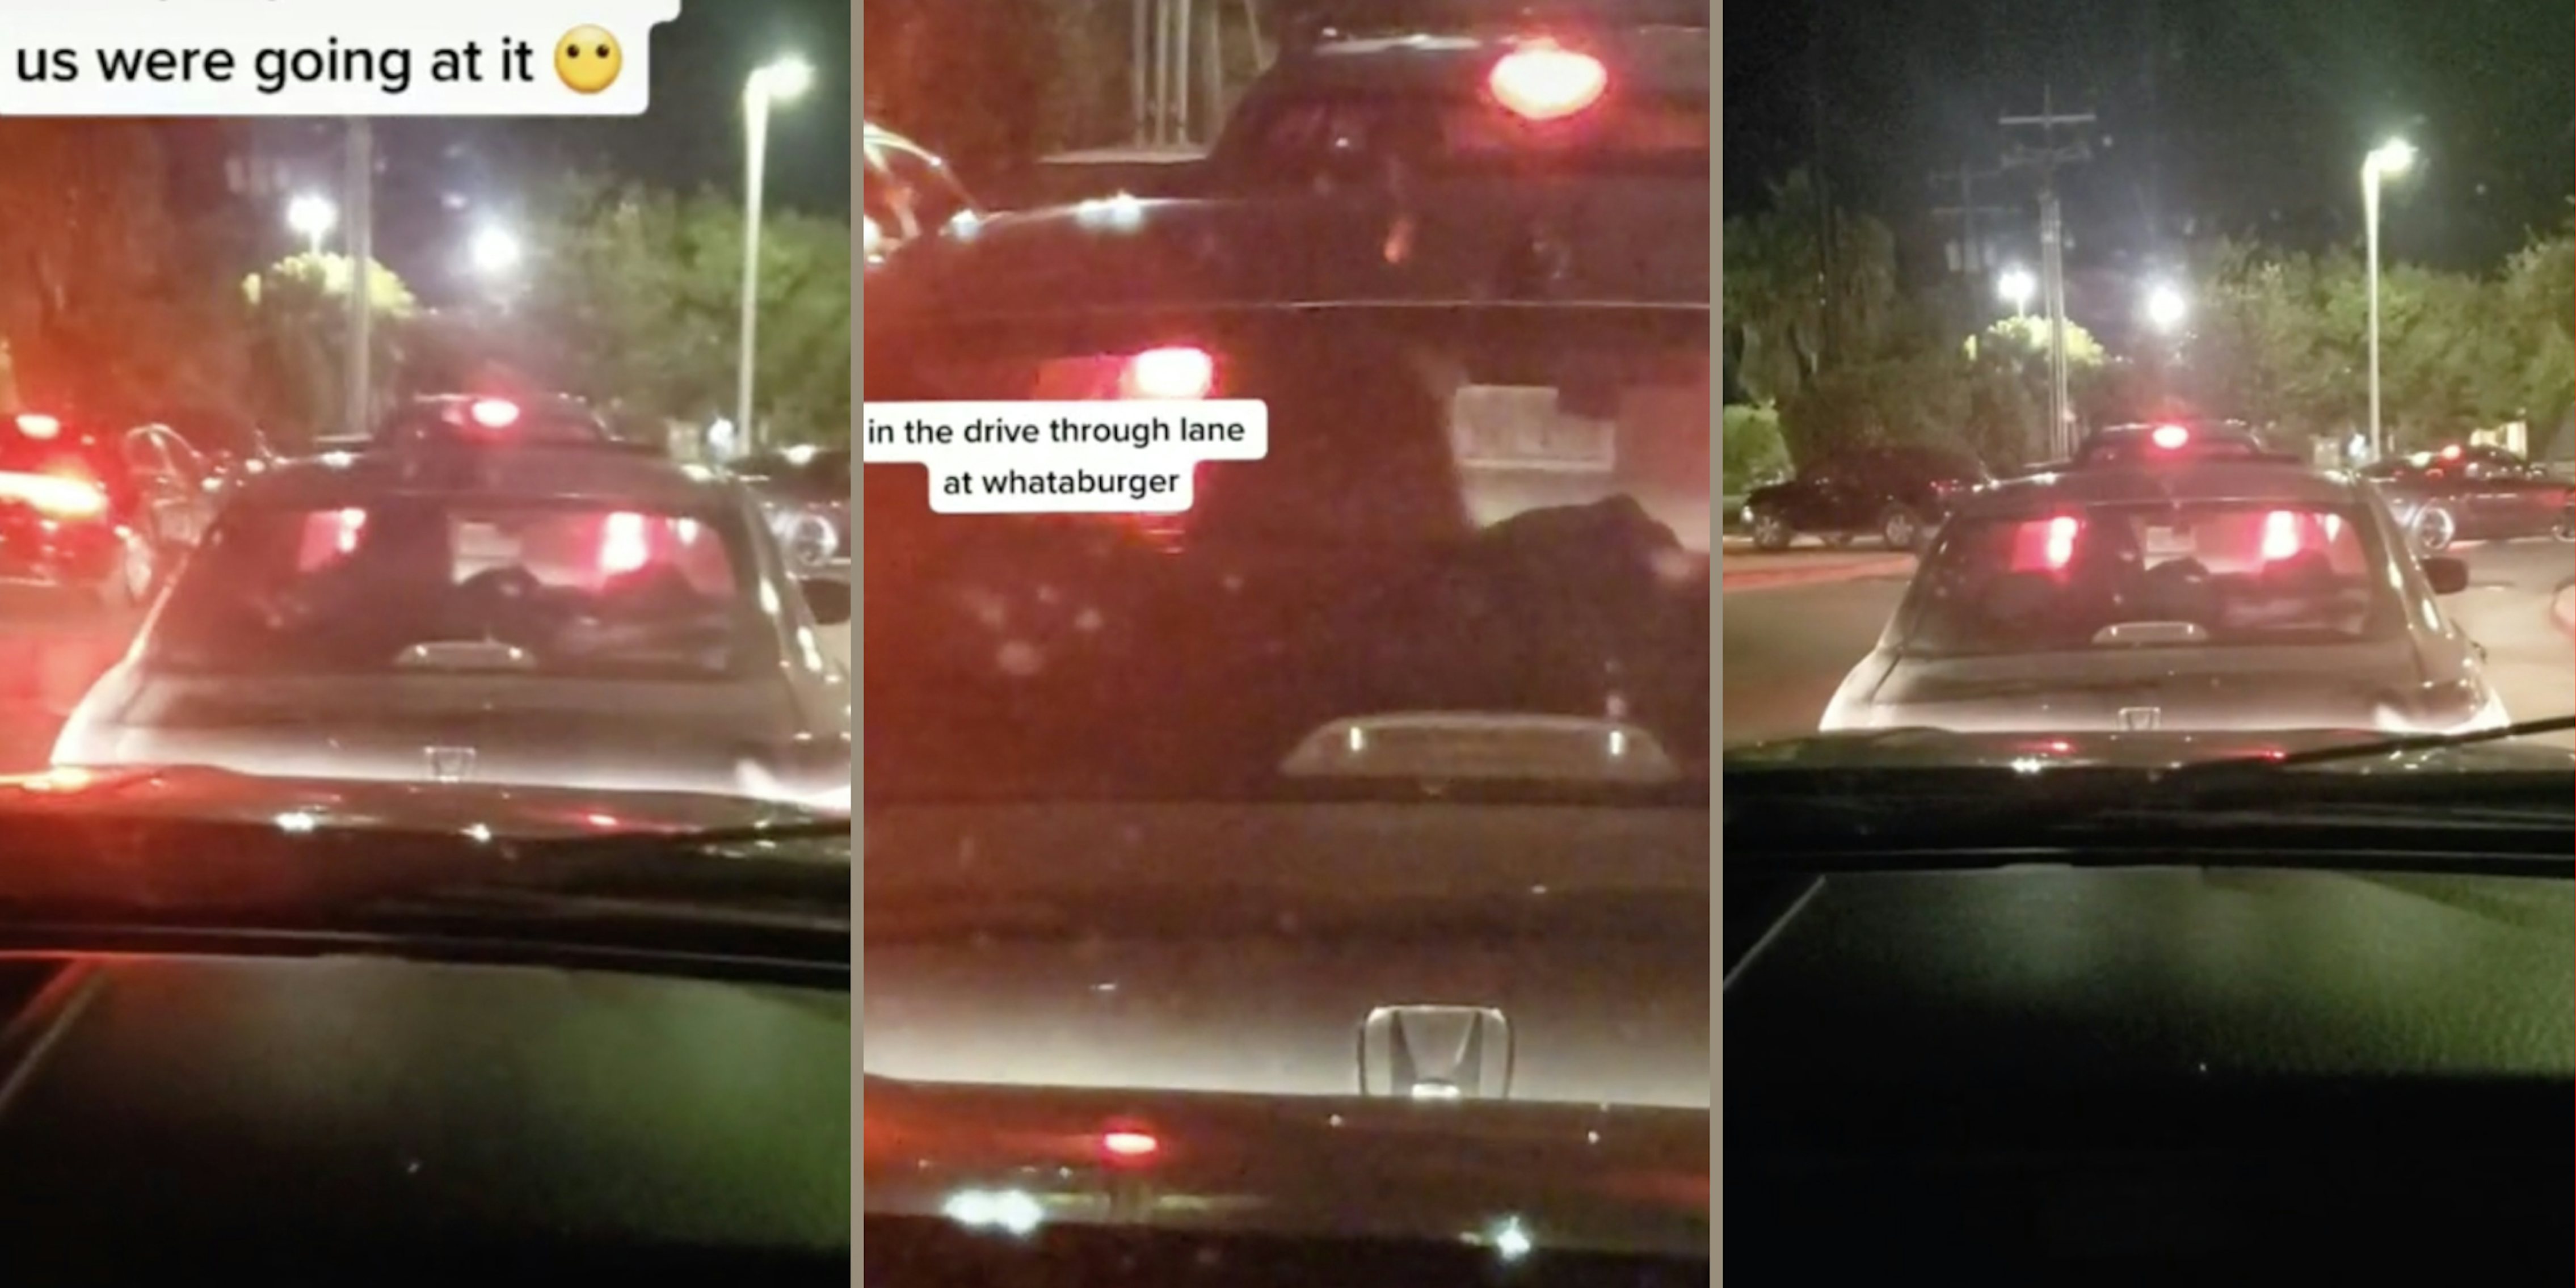 'the people in the car in front of us were going at it', 'in the drive through lane at whataburger' car in whataburger drive thru with people having sex